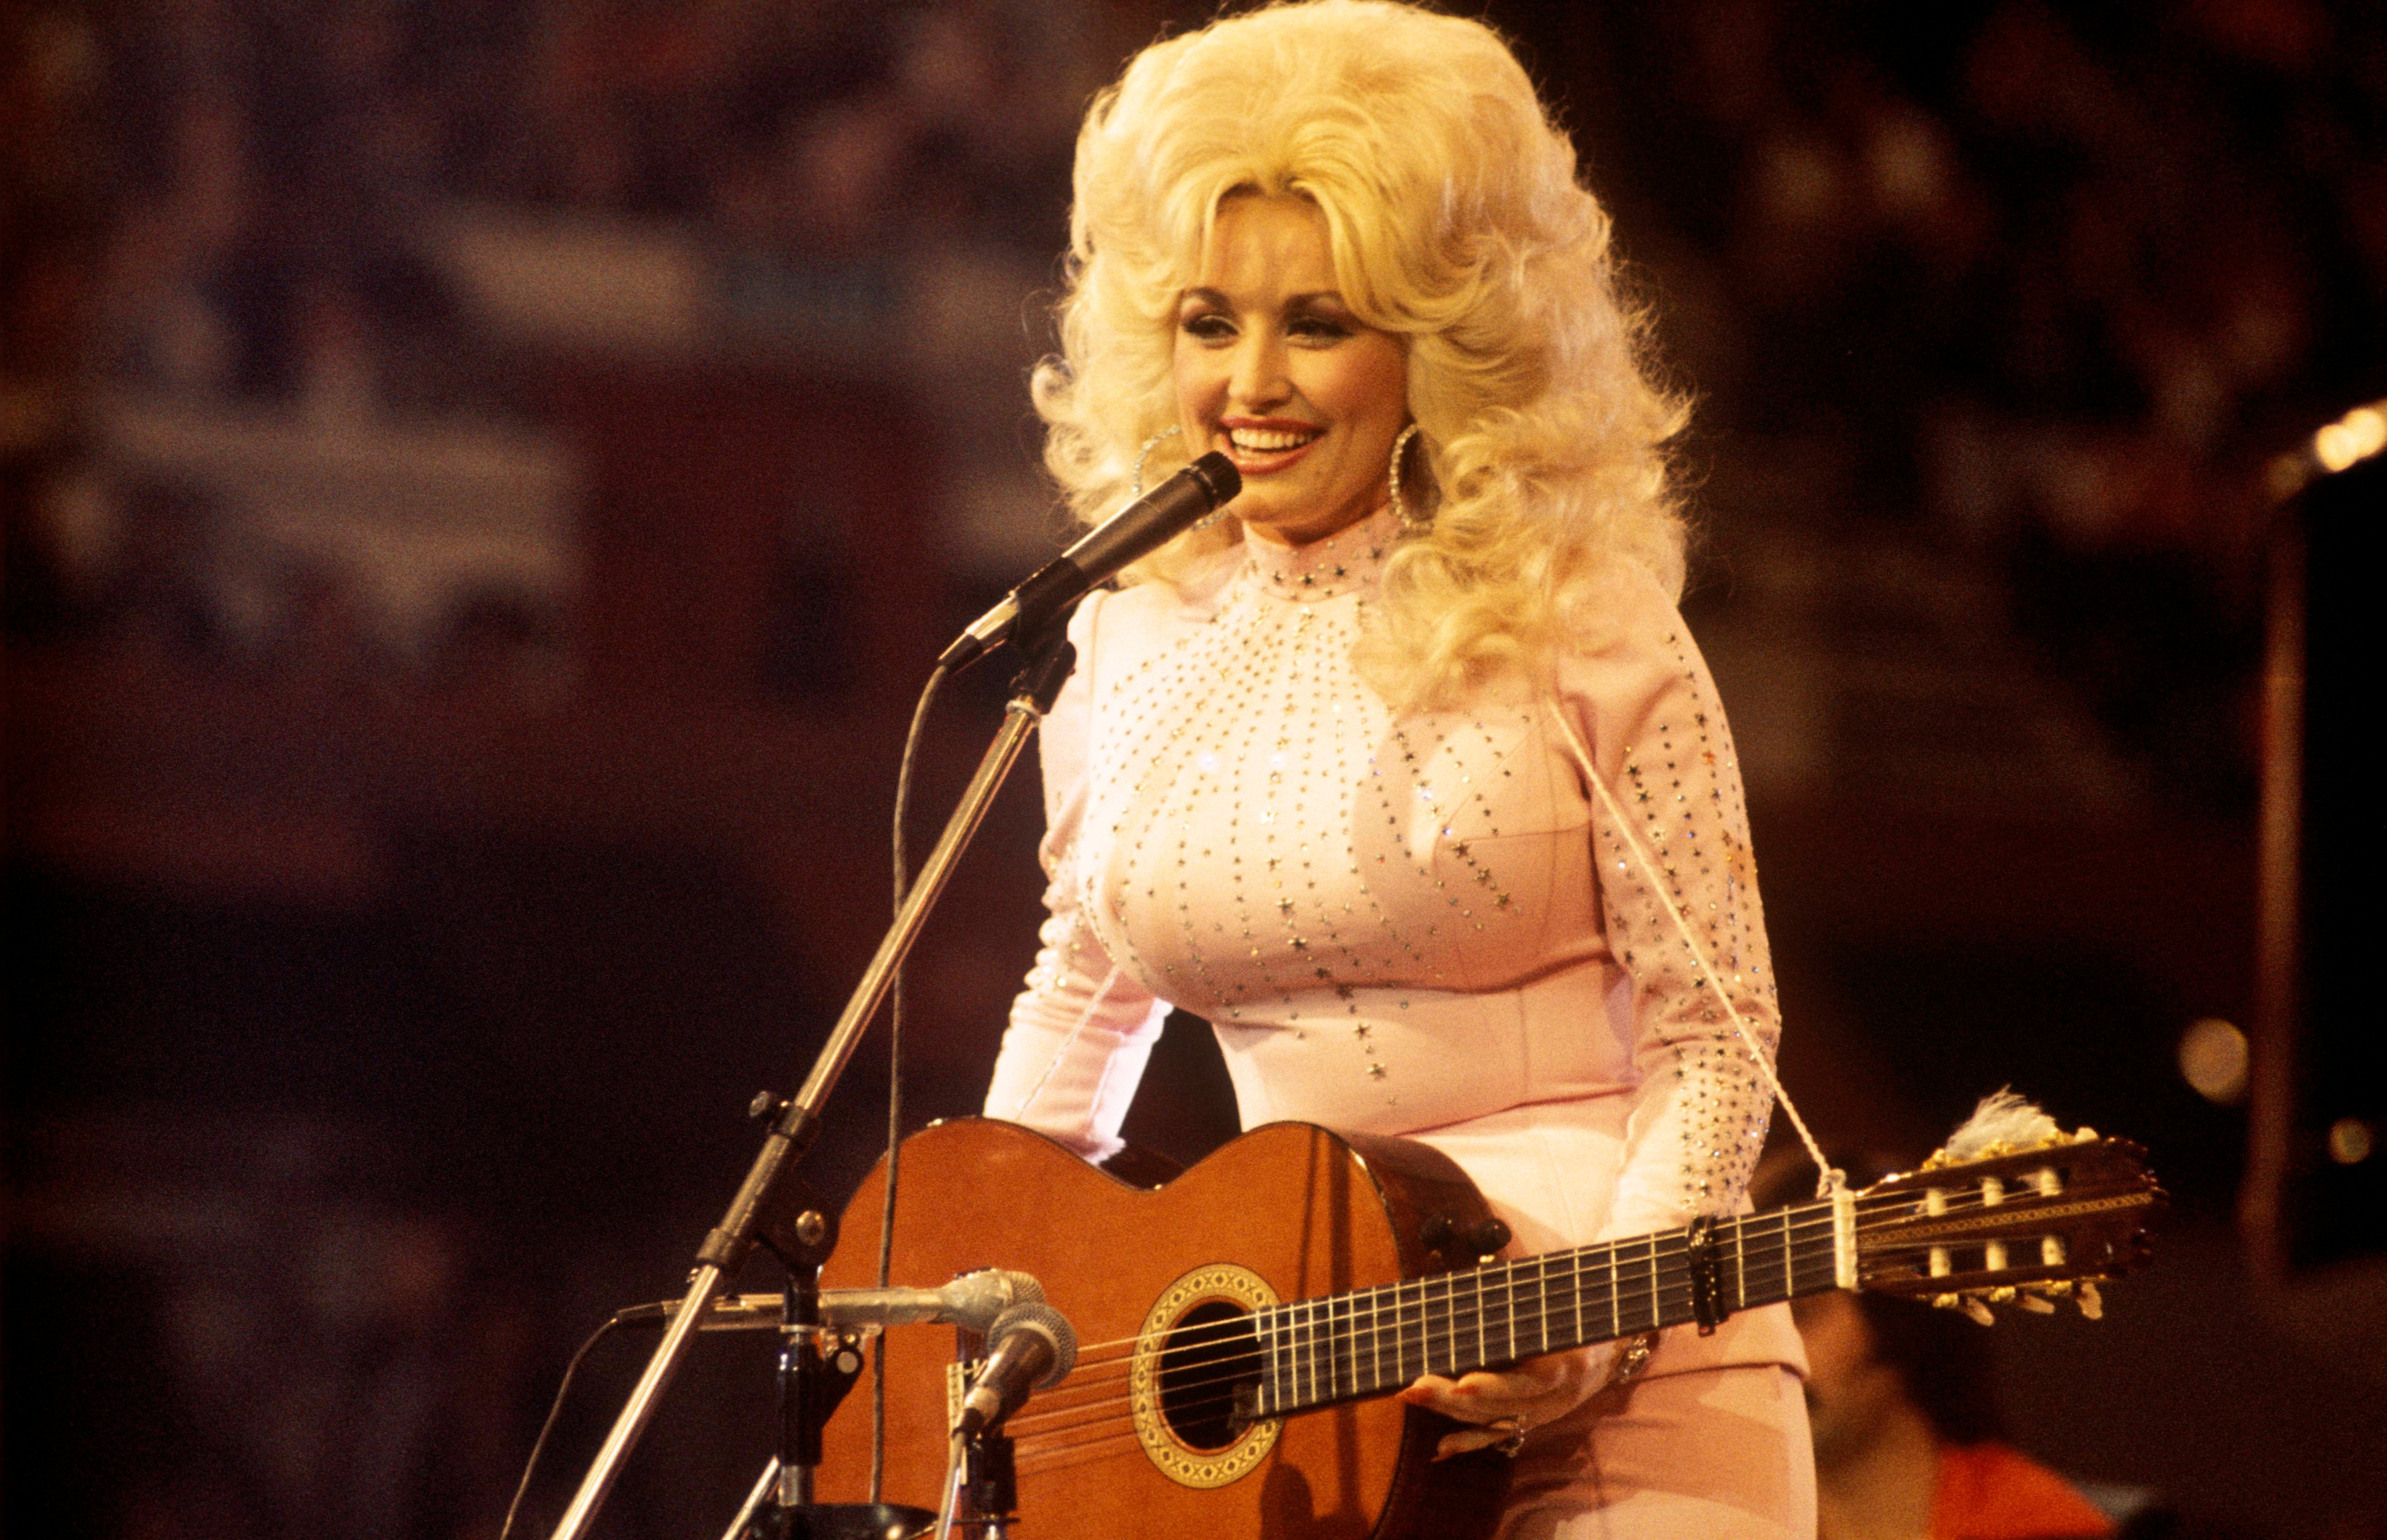 Dolly Parton wears a white sparkly shirt and holds a guitar. She stands in front of a microphone.